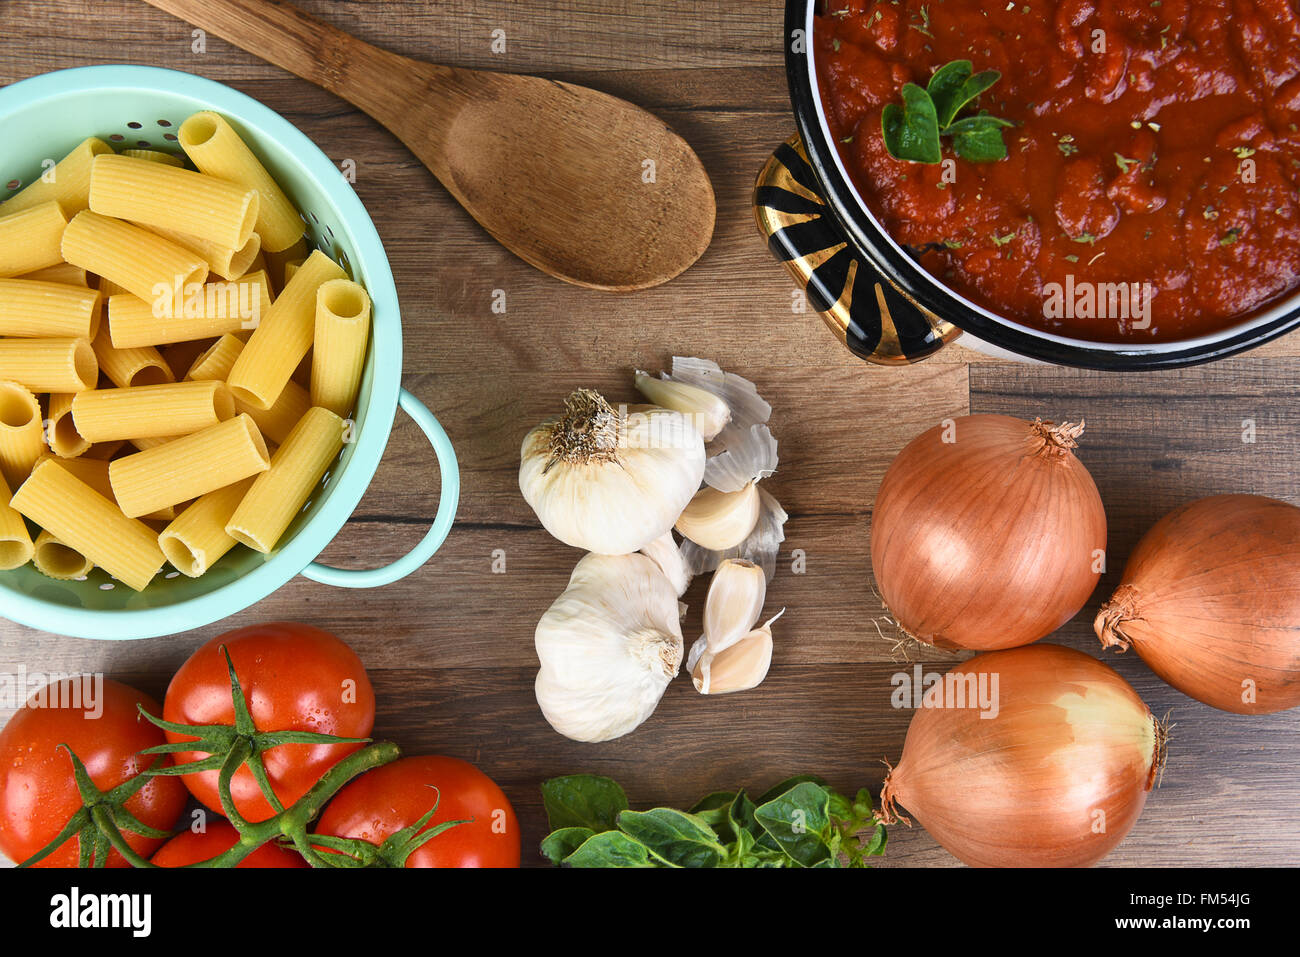 Italian meal ingredients on a wood kitchen table. A pot of sauce, colander of rigatoni, tomatoes, garlic, oregano, and onions se Stock Photo